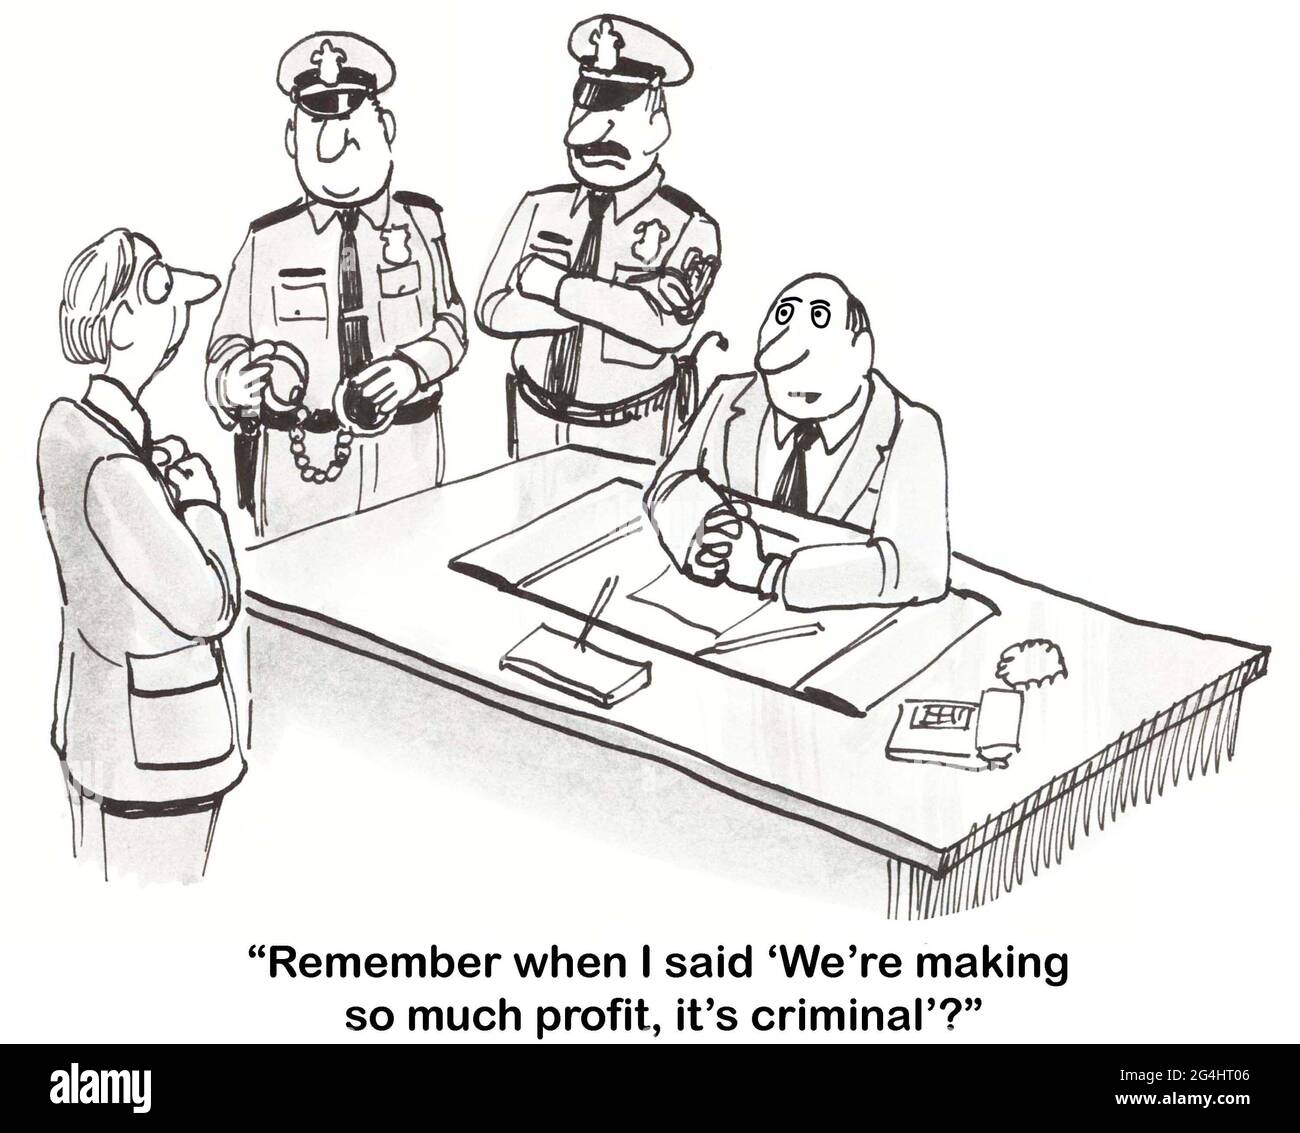 CEO is arrested for unreasonable profits. Stock Photo